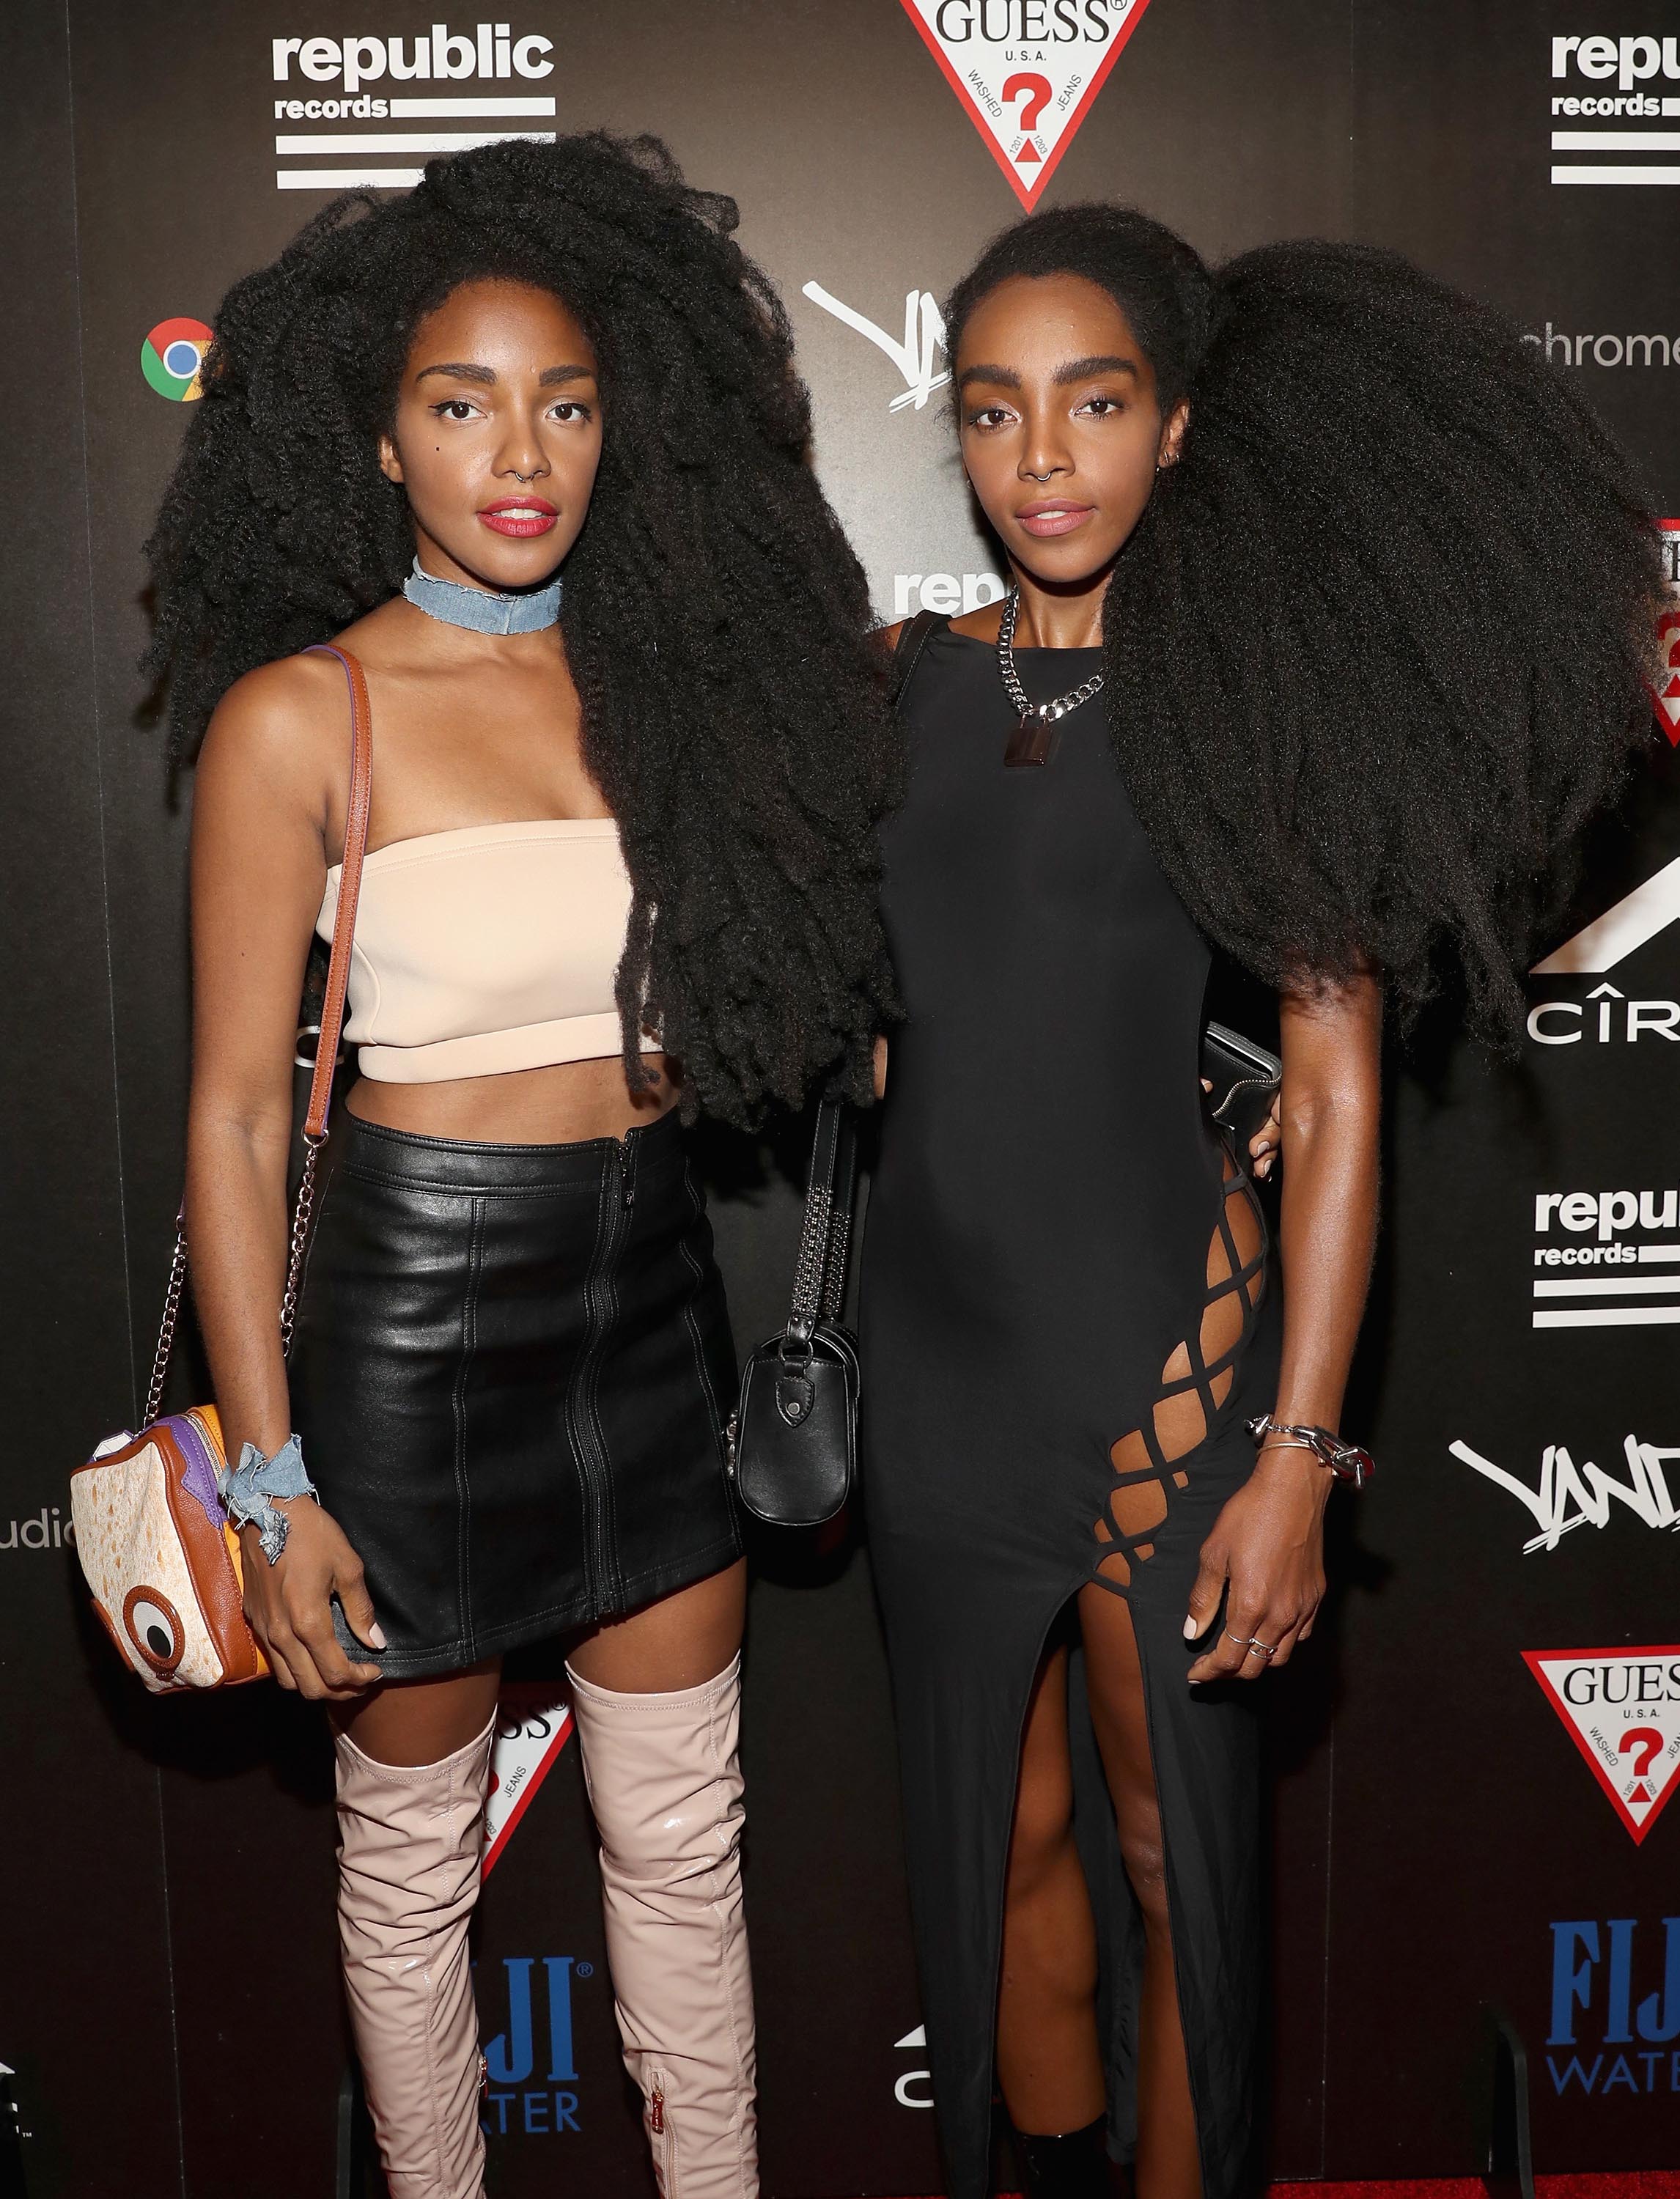 TK Quann attends a celebration with Republic Records and Guess